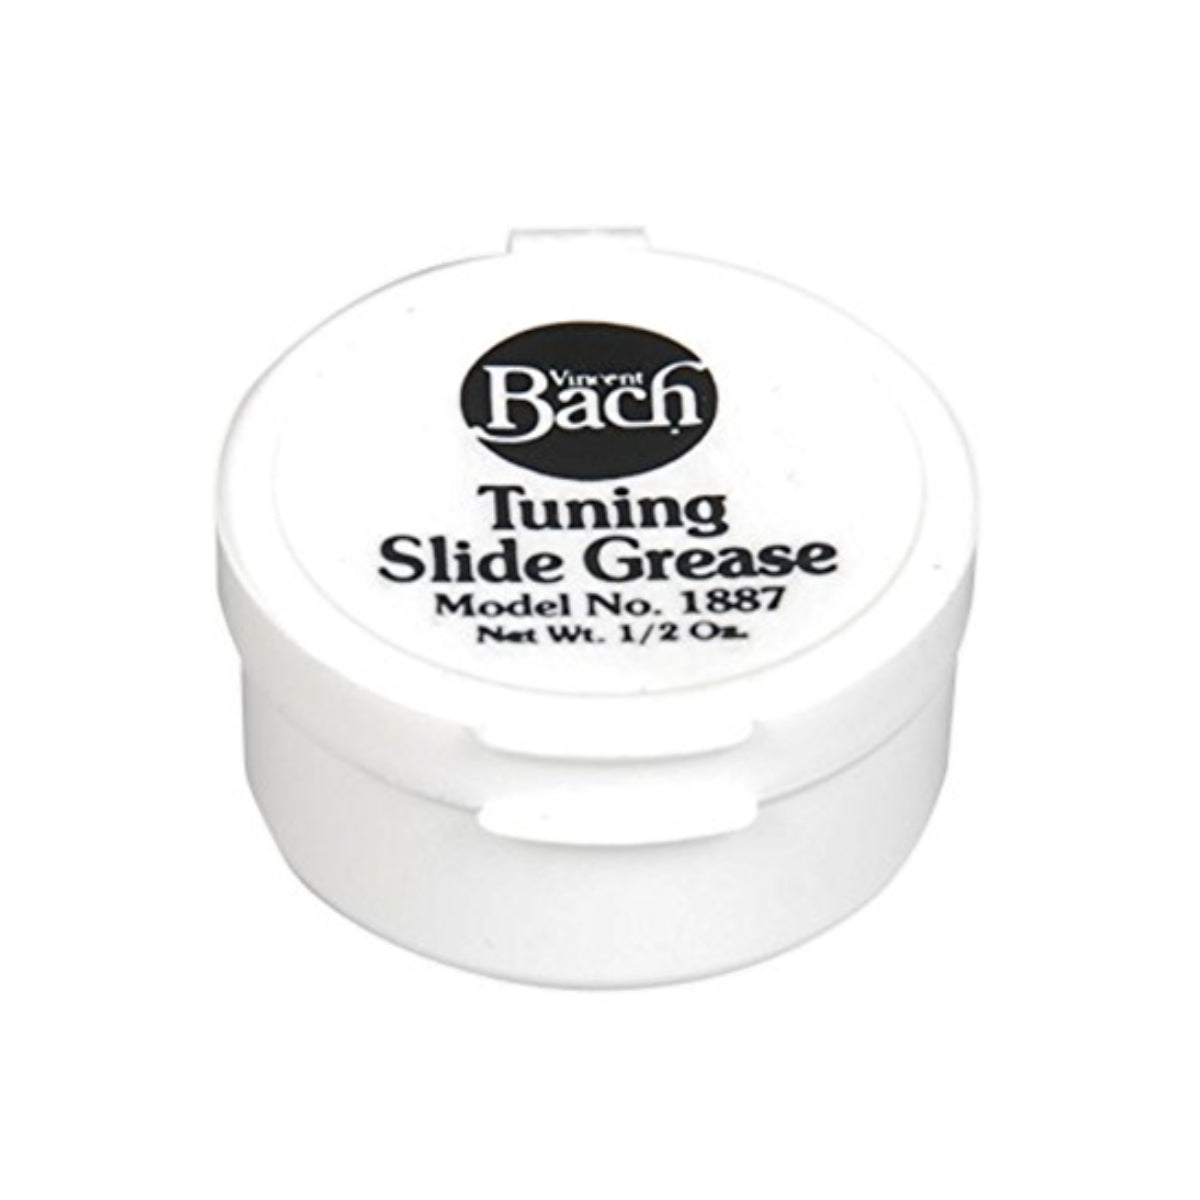 Vincent Bach Grease and Oil Tuning slide grease 1887 Tuning slide and cork grease.